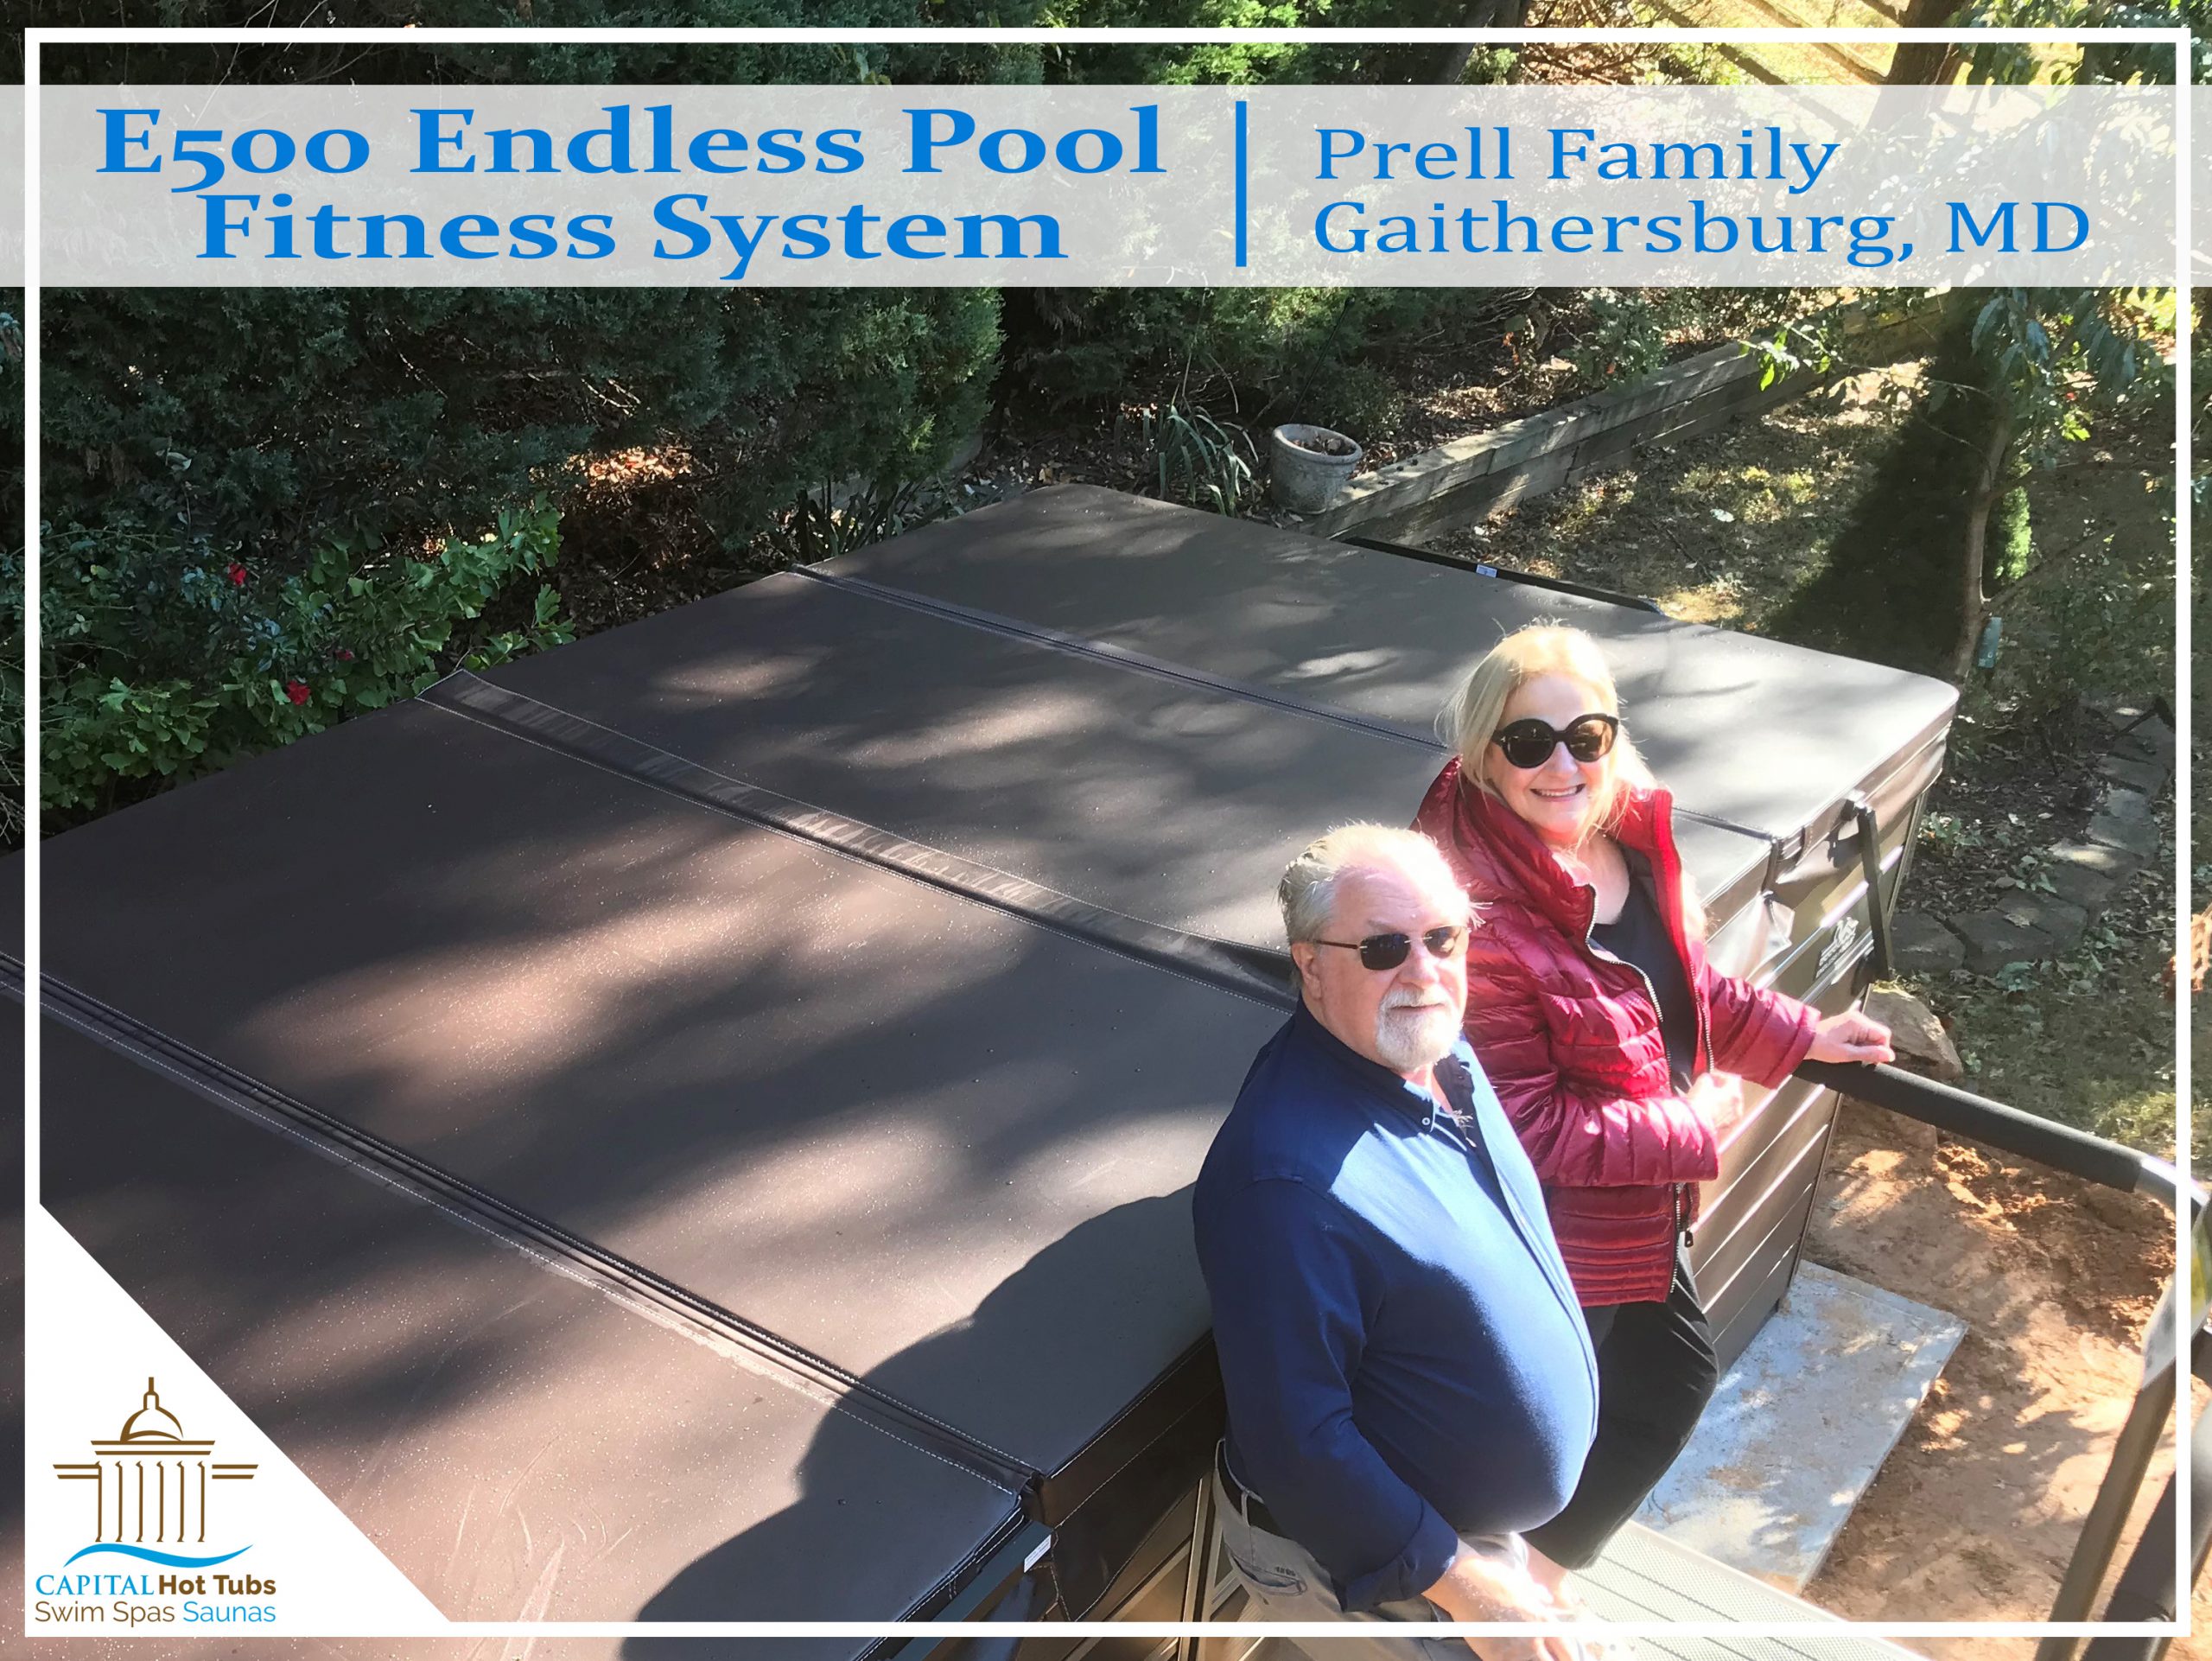 Endless Pool fitness system gaithersburg, md